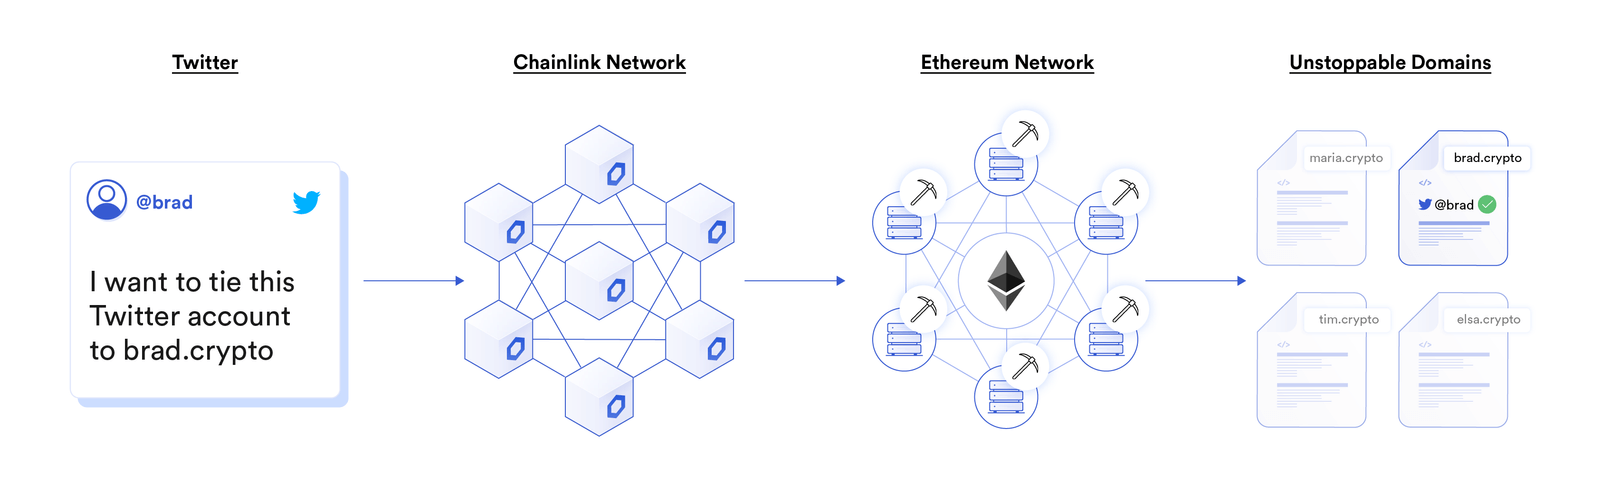 Unstoppable Domains uses Chainlink oracles to enable users to tie their off-chain Twitter identity to their on-chain Ethereum domain name